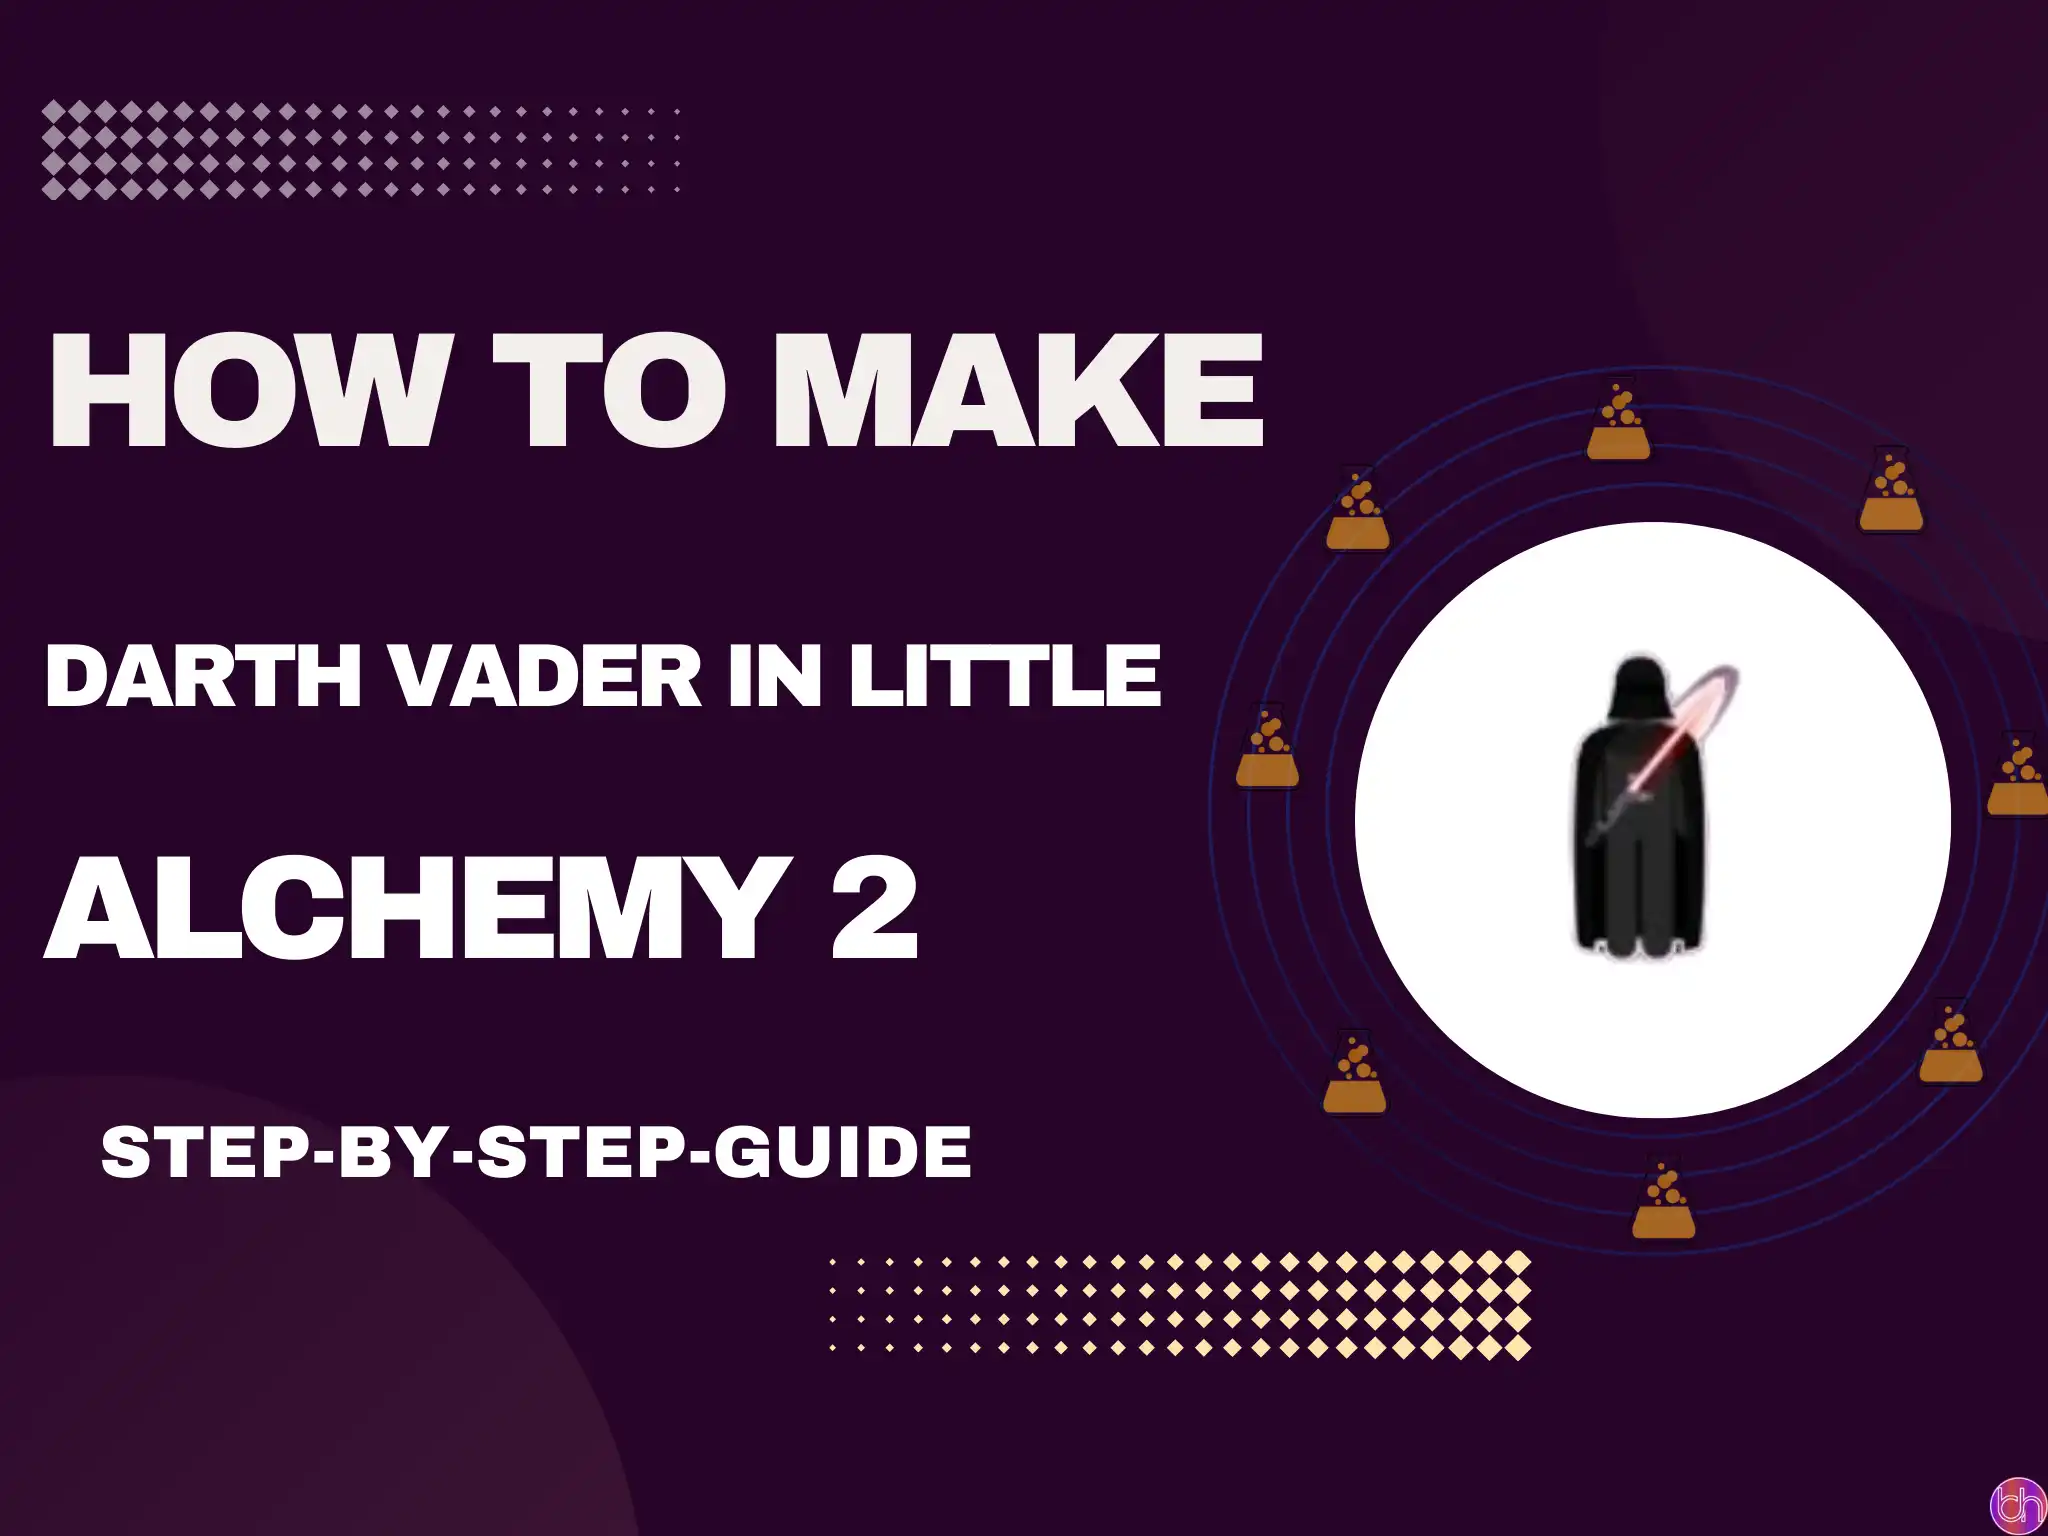 How to make Darth Vader in little alchemy 2